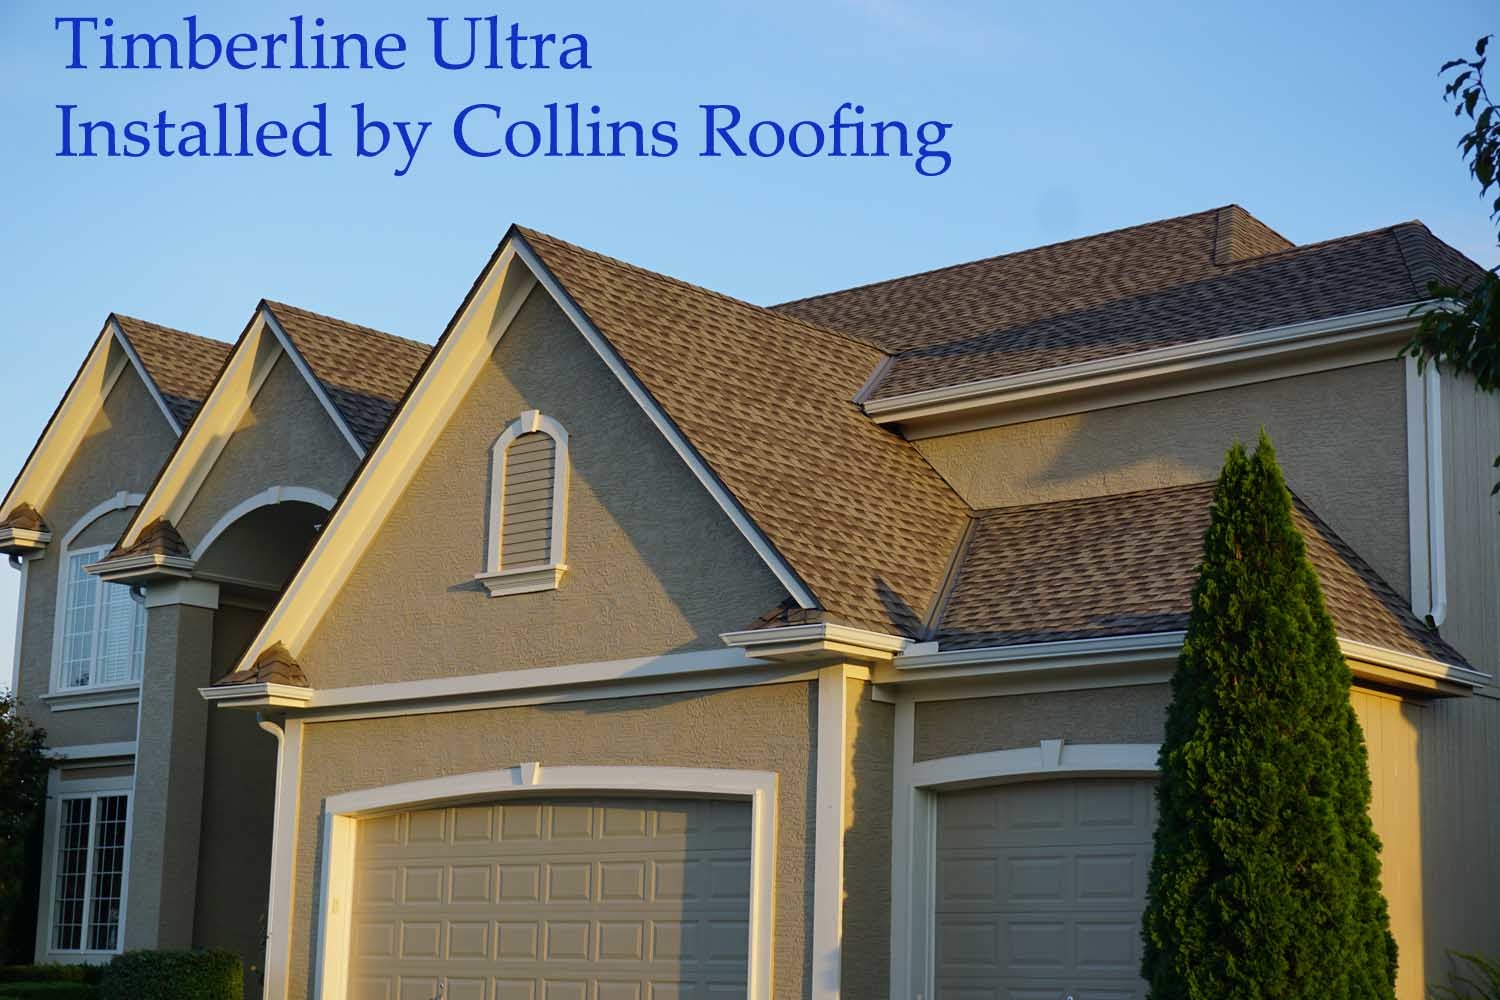 Timberline Ultra 50yr (Lifetime) Roof System in Lees Summit, MO Installed by Collins Roofing

Roofing in Lees Summit